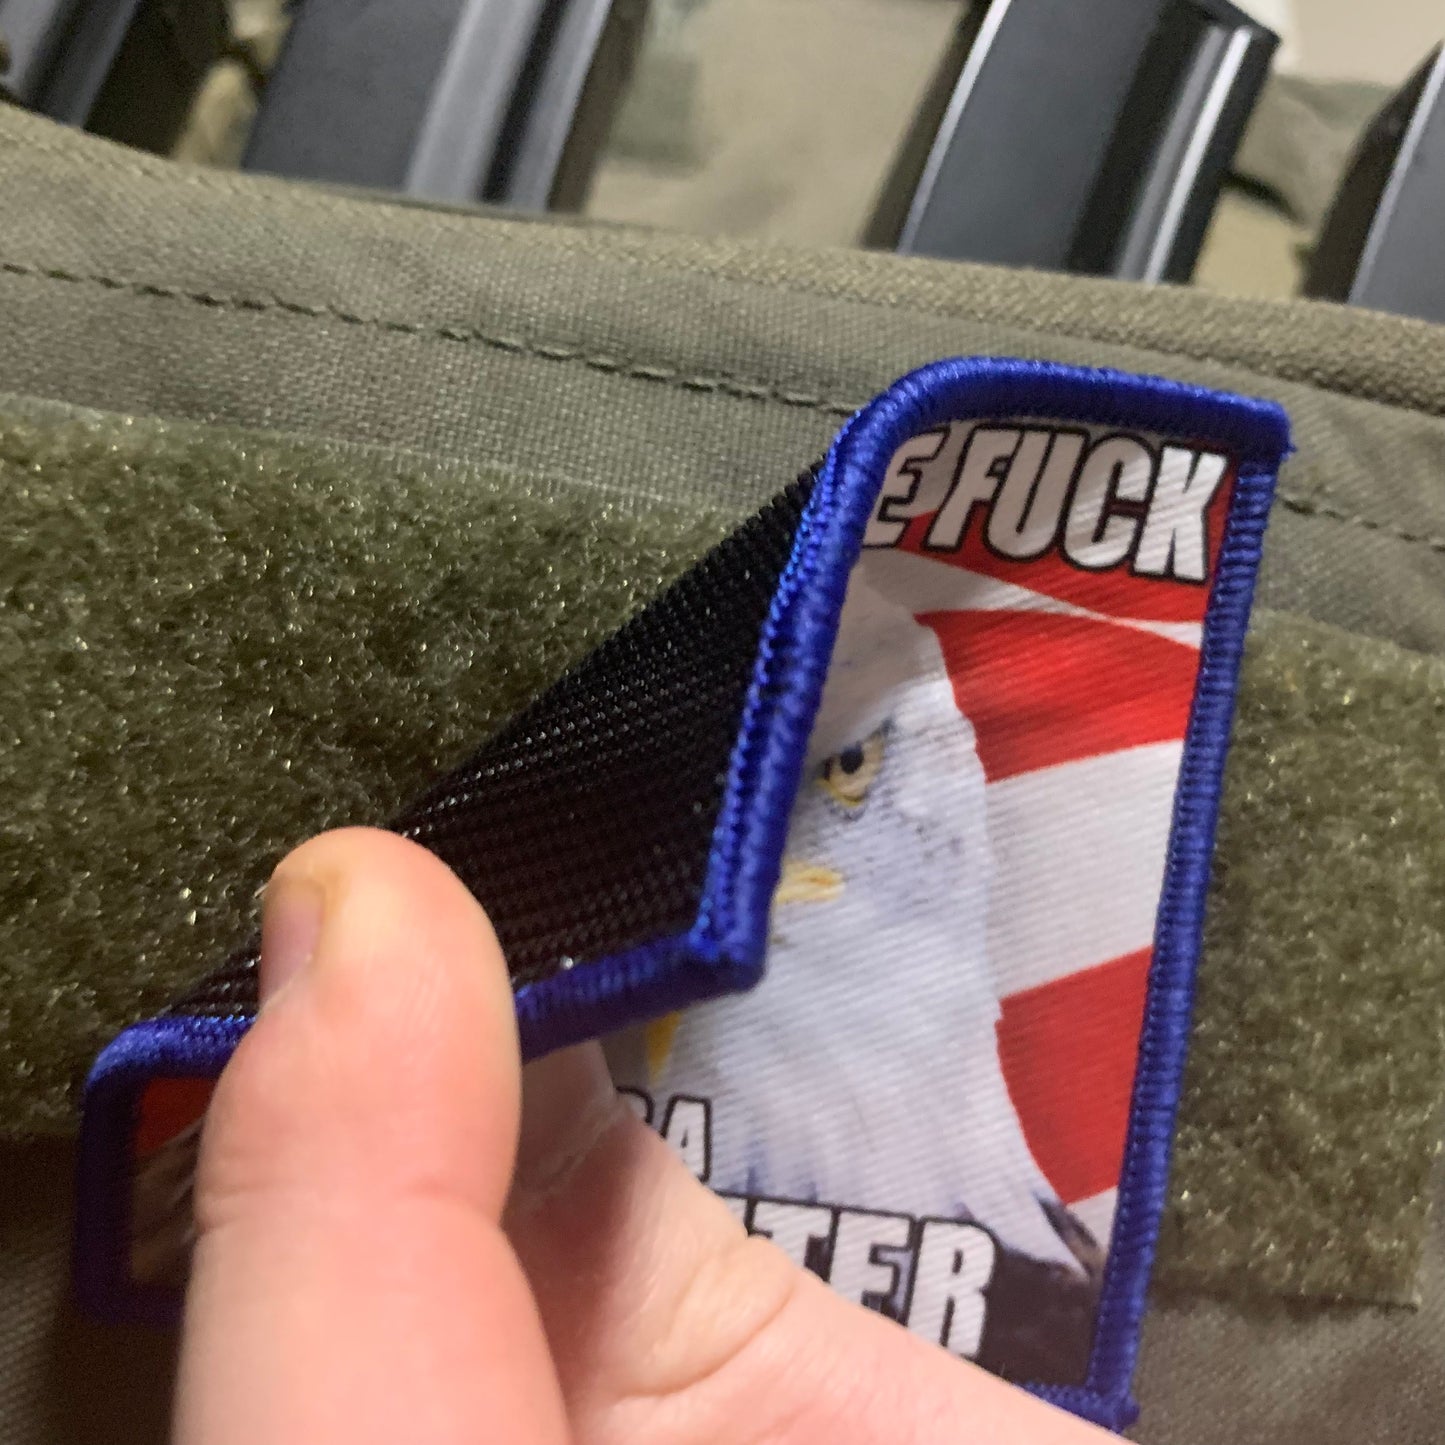 What The Fuck Is a Kilometer Bald Eagle Patch